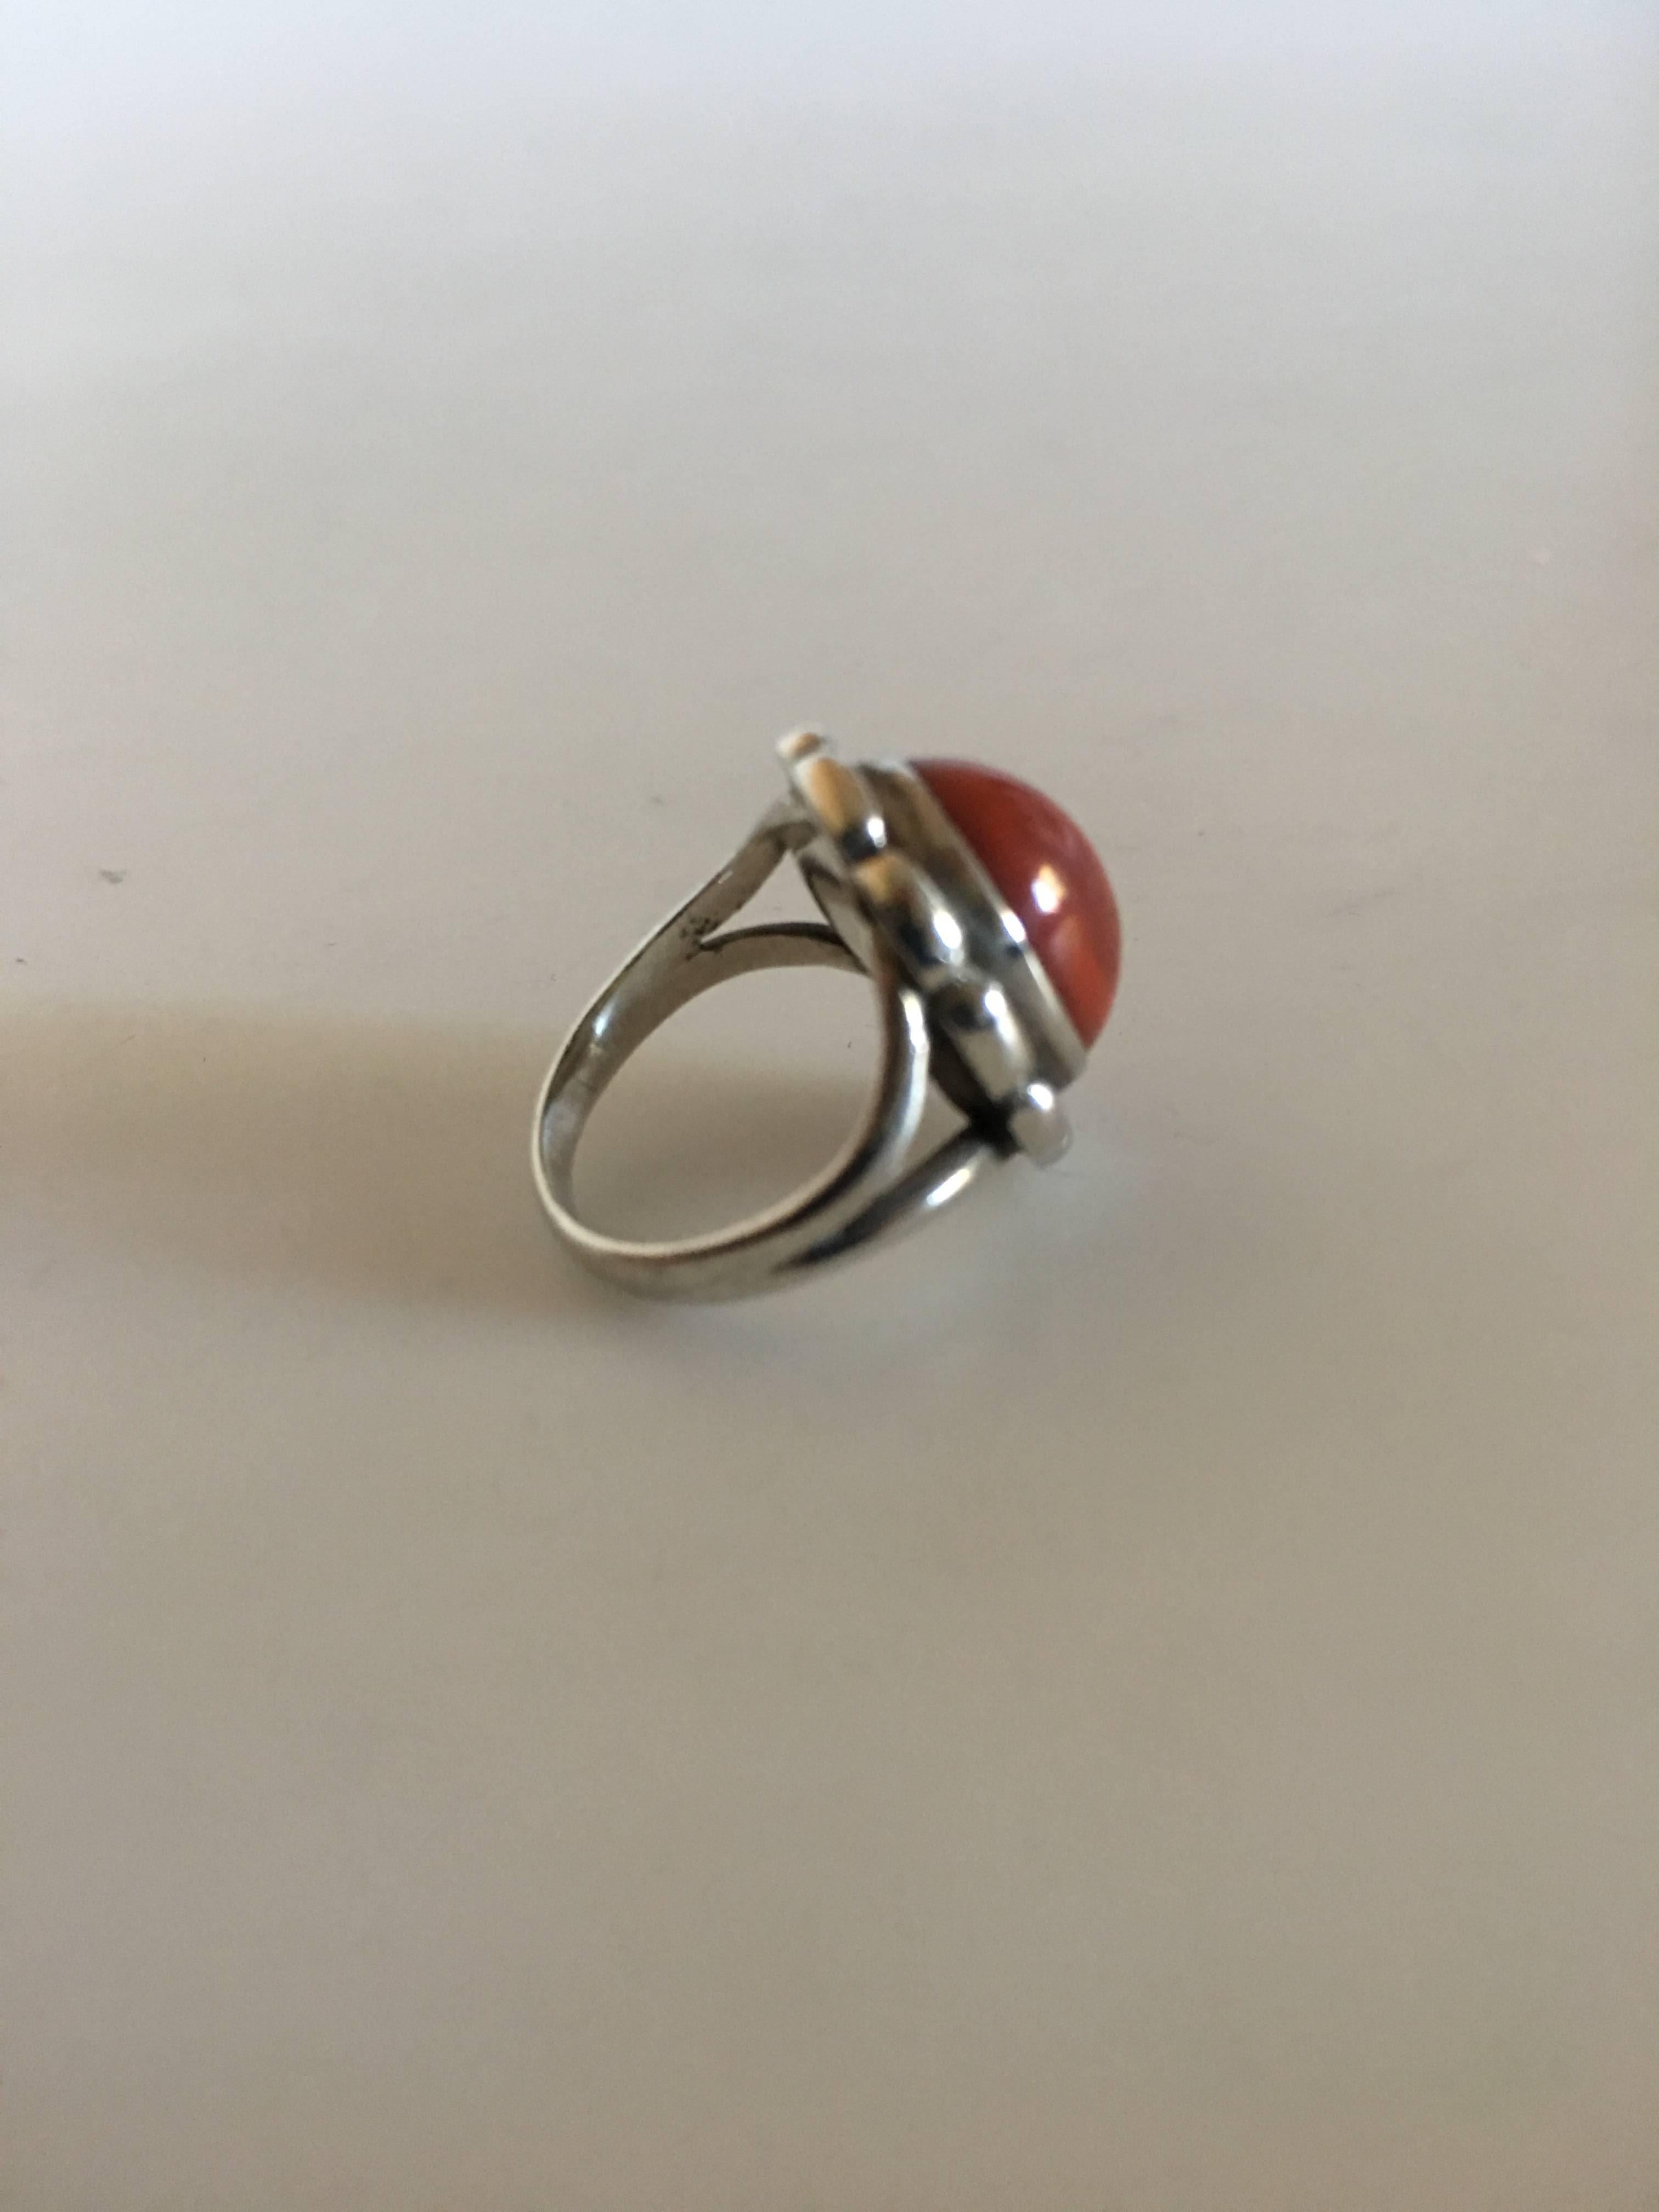 Georg Jensen Silver Ring No. 19 with Coral. Ring Size No. 44. From 1910-1925. In 830 Silver.